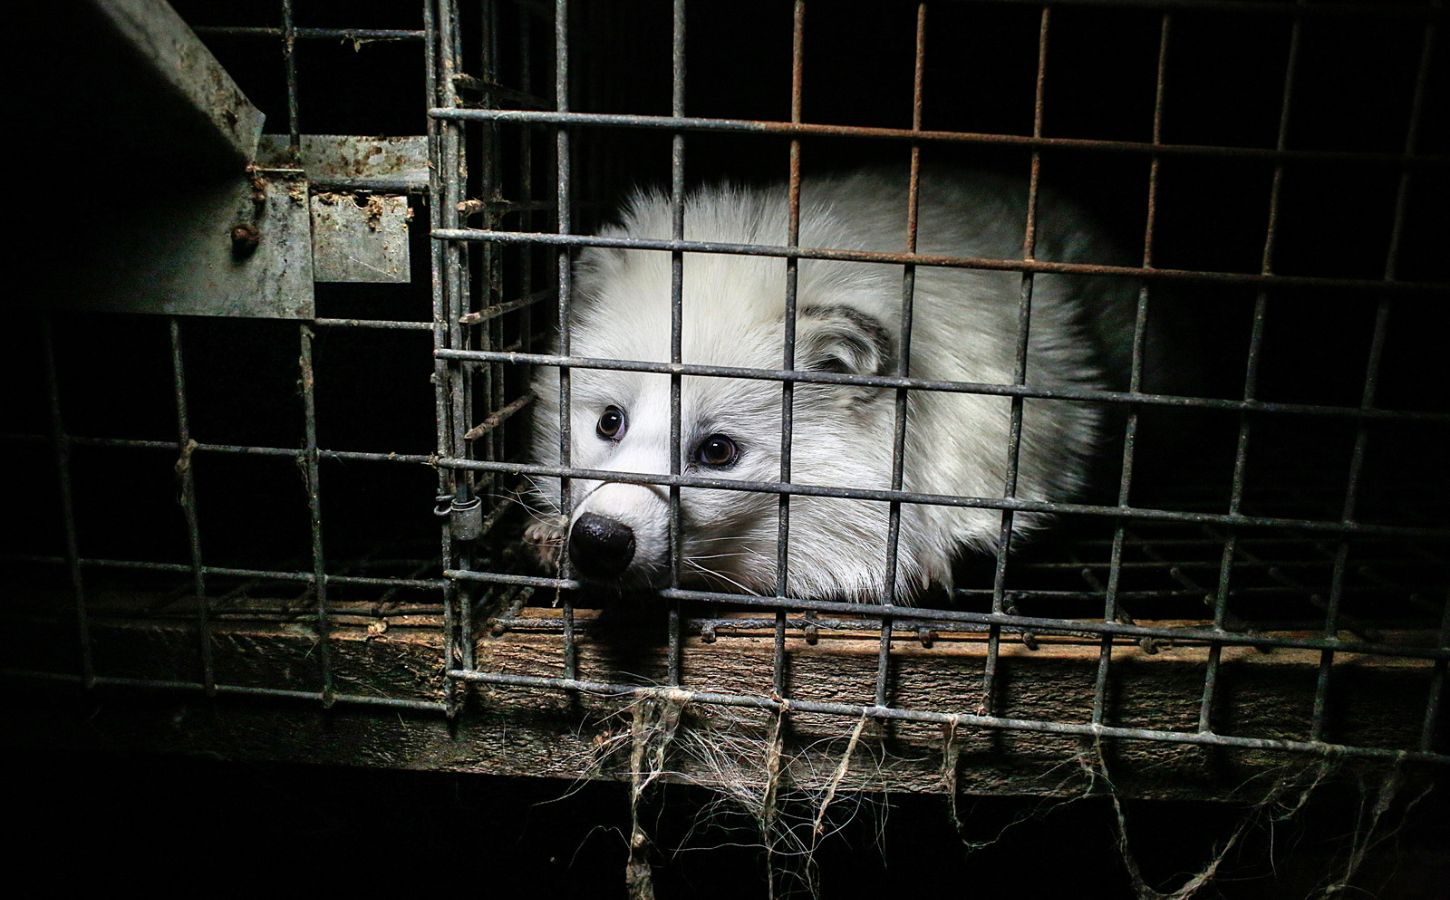 A solitary white raccoon dog cowering in a tiny and dark wire cage on a fur farm